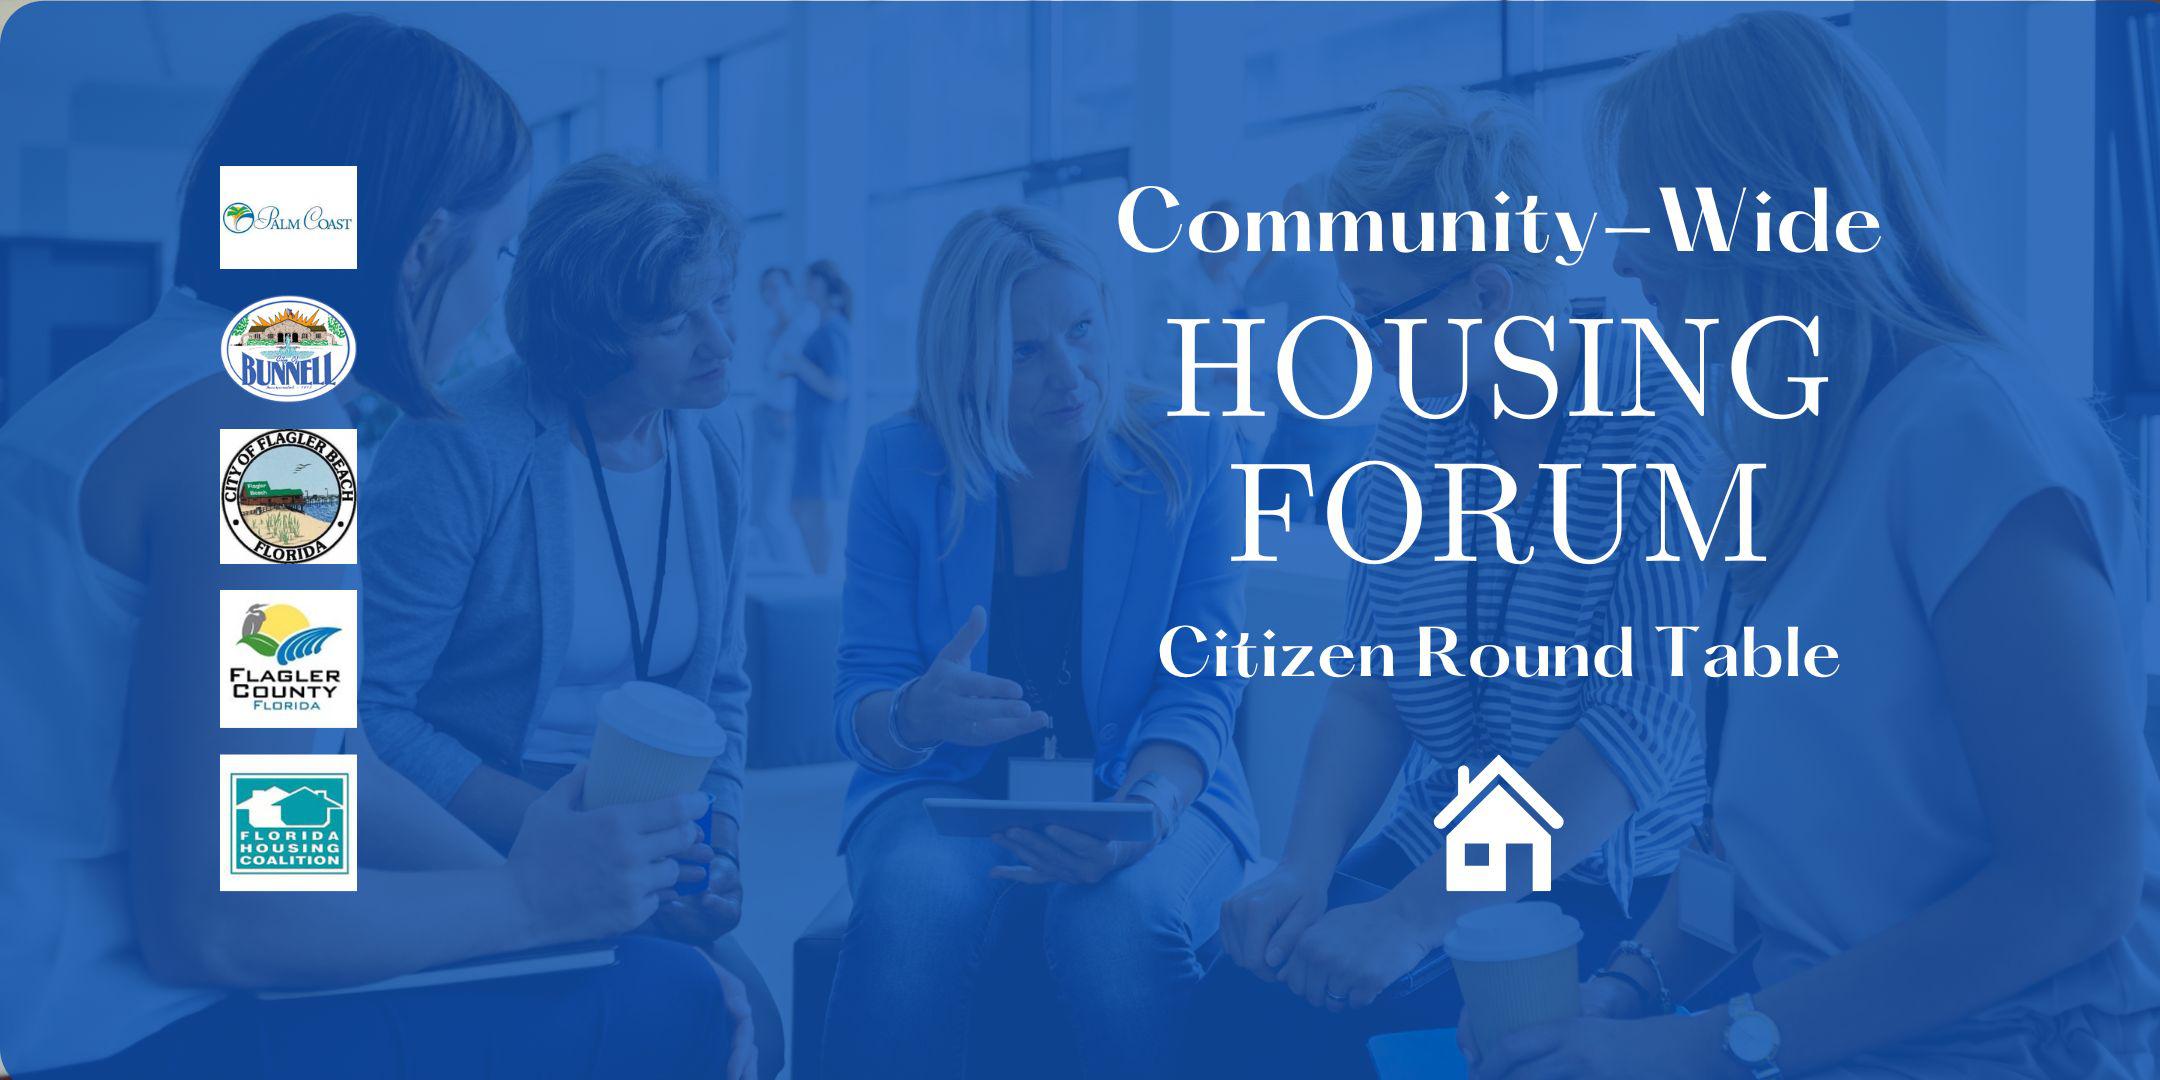 CommunityWide Housing Forum Live Local Act April 21, 2023. Tickets